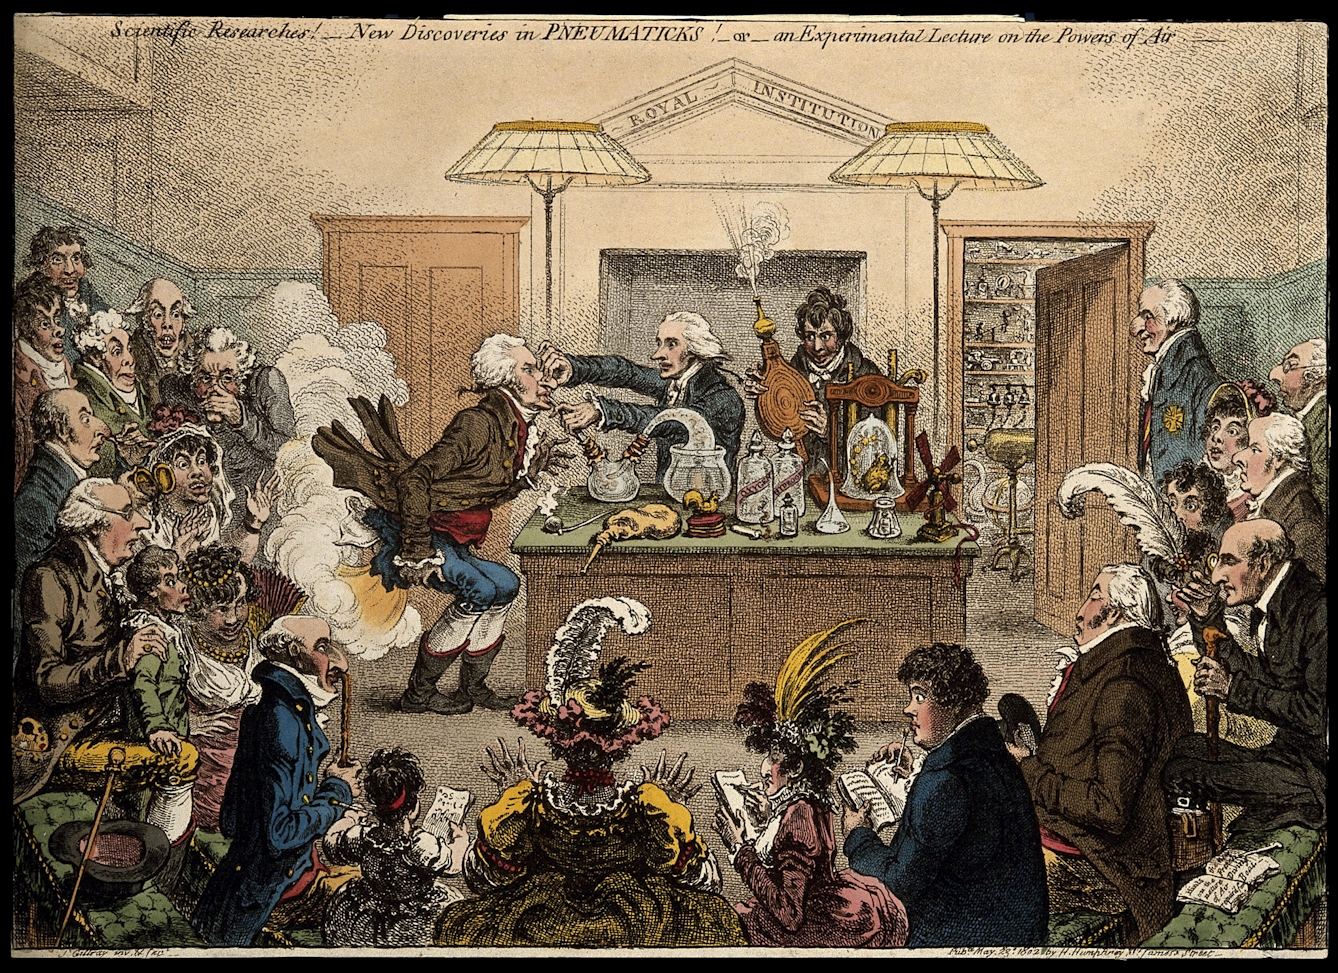 Colour print of a scientific lecture at the Royal Institution on London in the 19th century. One man stood behind a desk covered in scientific equipment is administrating gas to an older man at the same time, the man is expelling clouds of gas from his behind. A younger man stands beside the demonstrator with a set of bellows in his hands. They are watched by a crowd of wealthy men, women and children, dressed in fine clothing, many taking notes while seated in a lecture theatre. A group directly behind the man expelling gas hold their noses and pull faces in disdain.